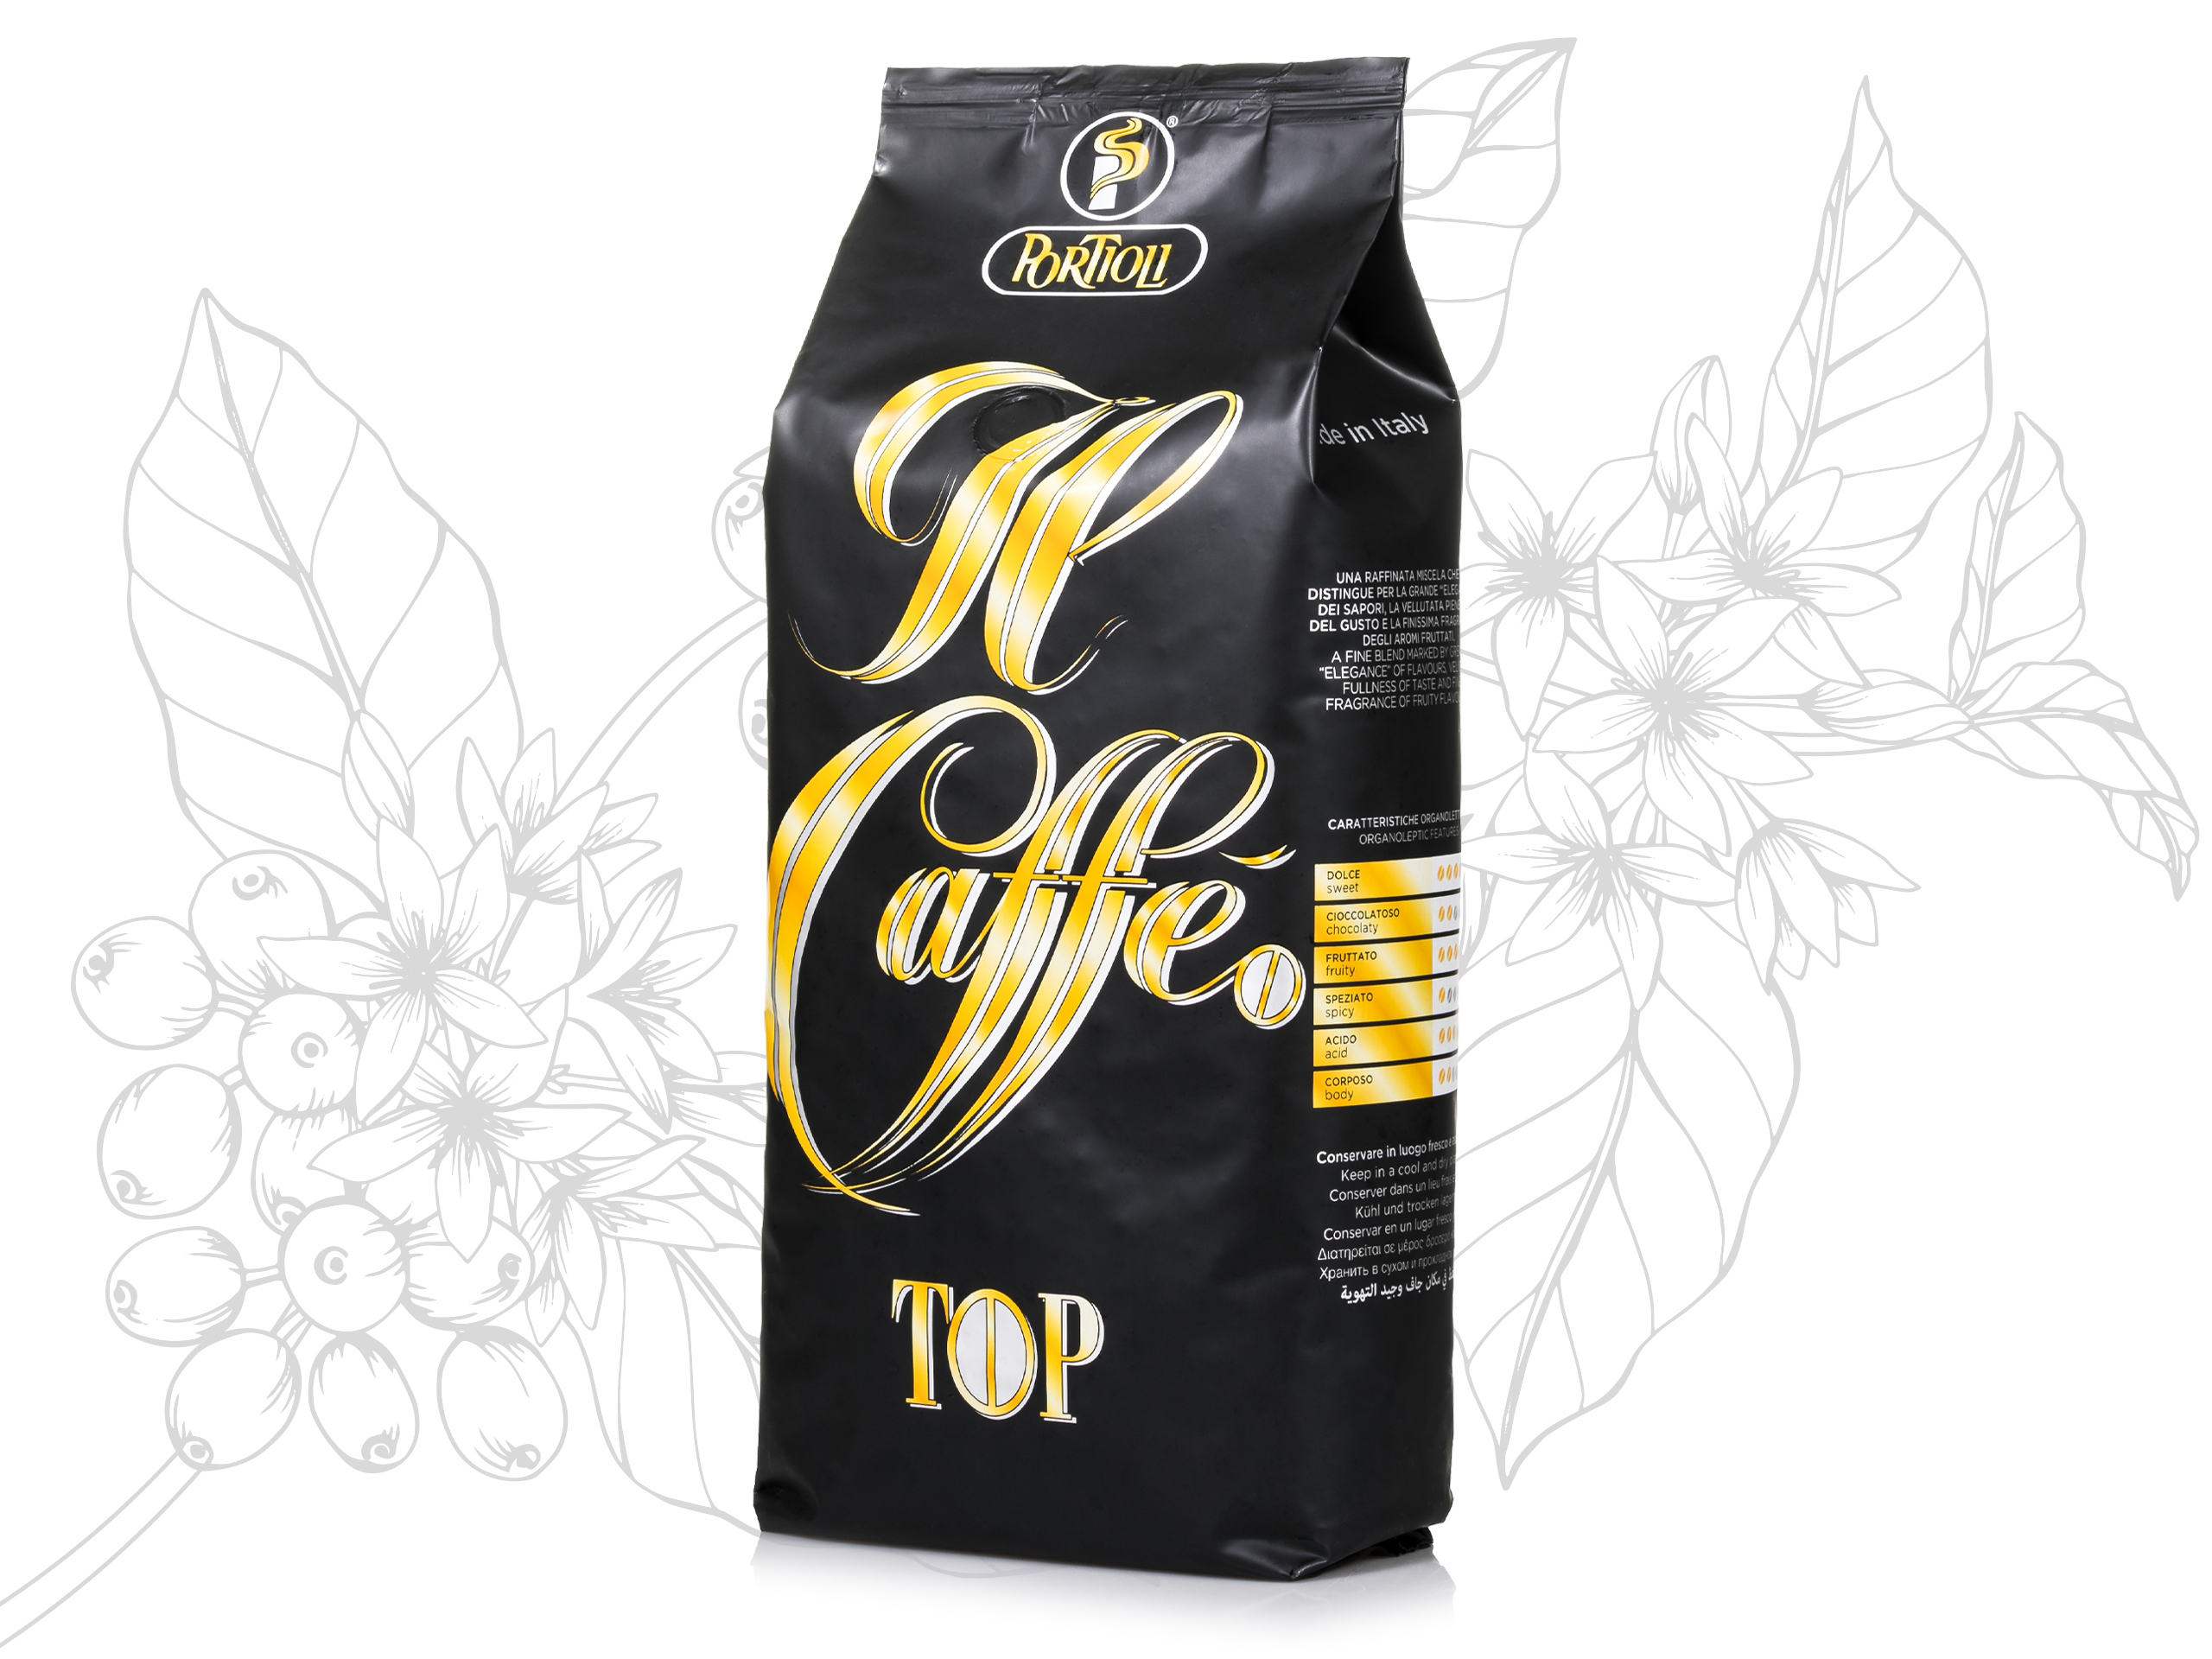 Top coffee blend for bars